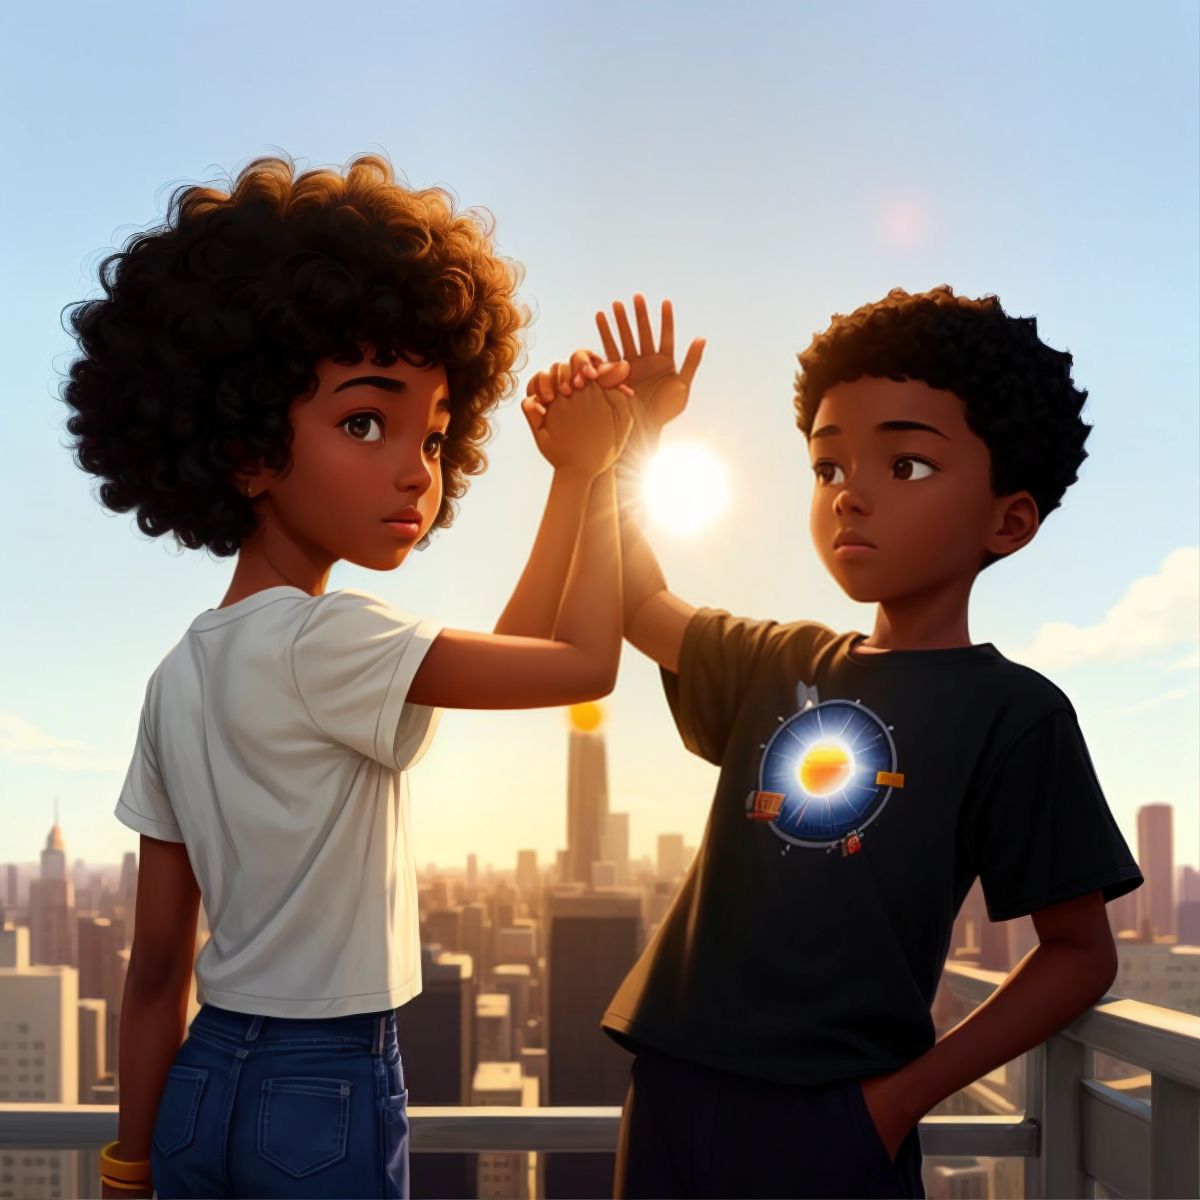 Kid 1 Boy and Kid 2 Girl high-fiving with a backdrop of a thriving city using solar power